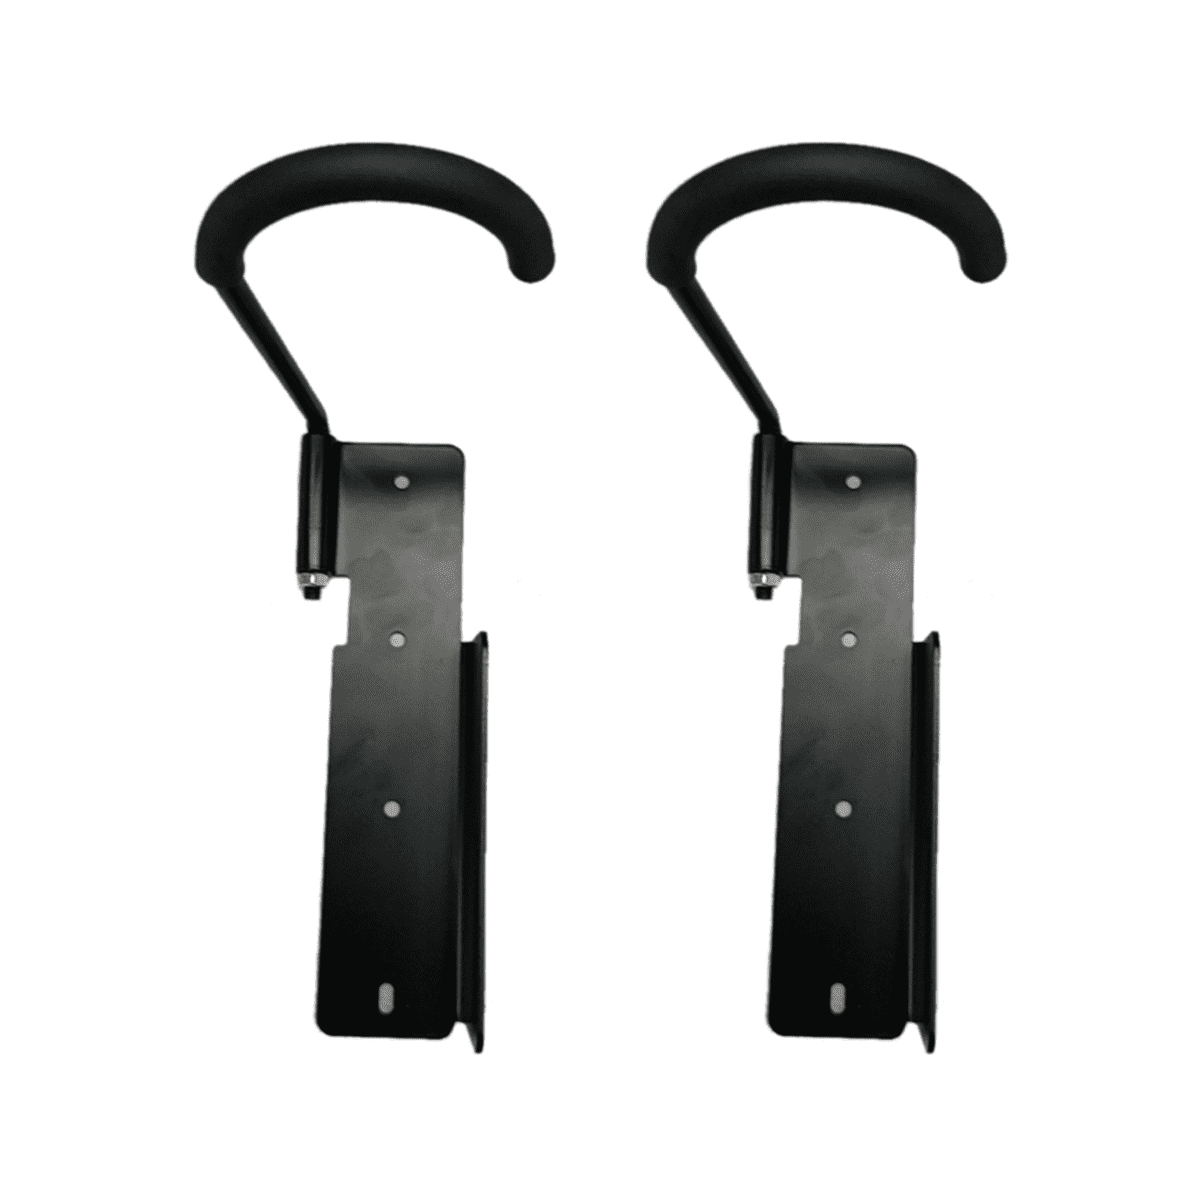 Concord Heavy Duty Bicycle J Hooks, Powder Coated, Limit 50lbs, 2 Pack, 11  D x 5 H x 1 W, 0.6 lbs